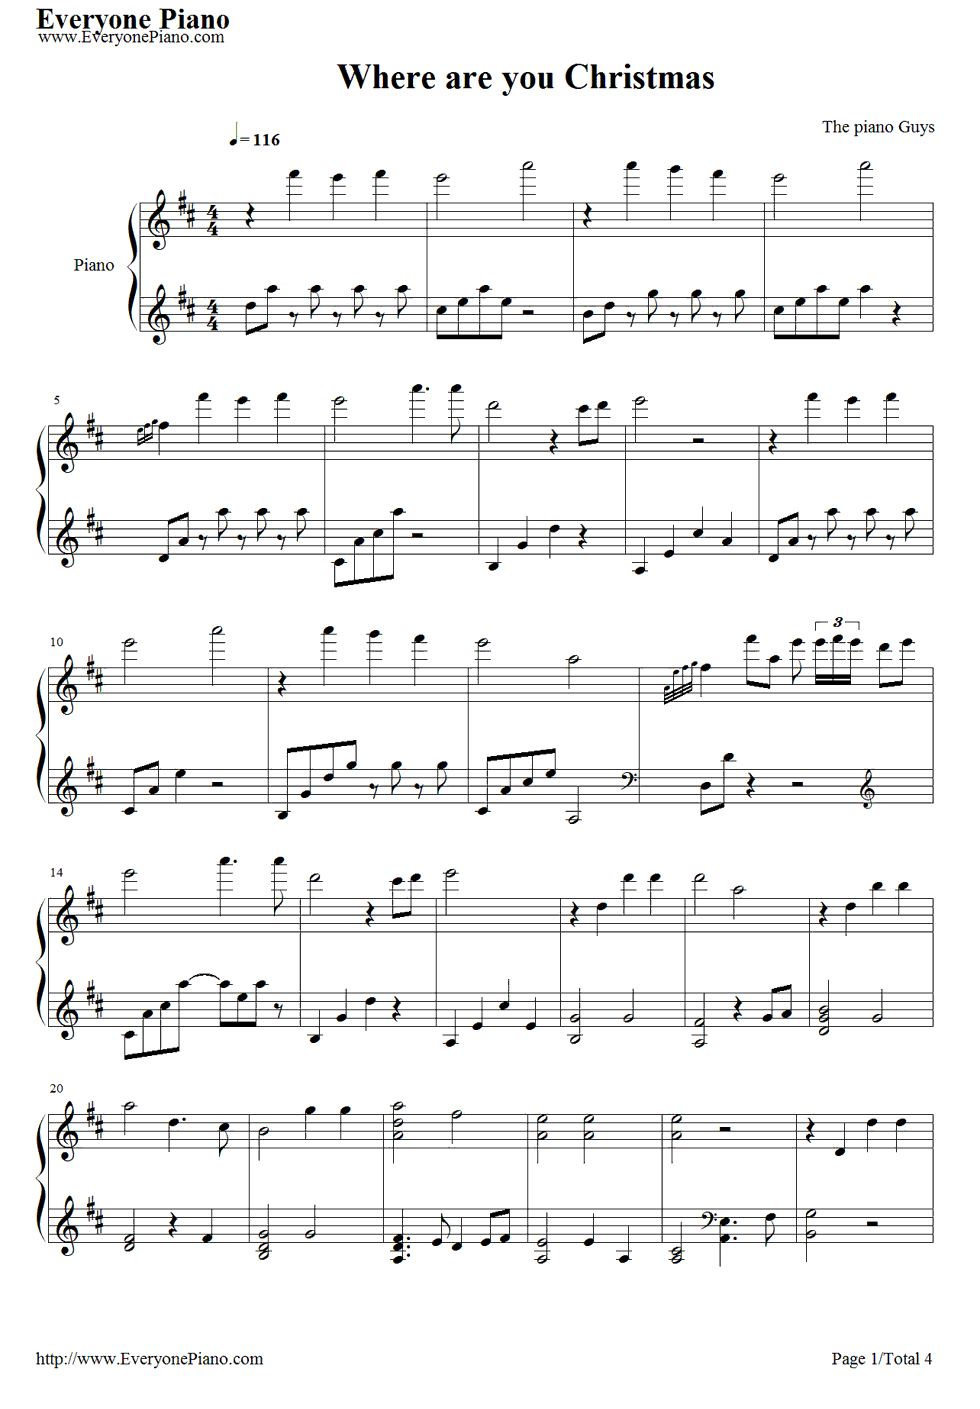 Free Where Are You Christmas-The Piano Guys Sheet Music Preview 1 - Free Printable Christmas Music Sheets Piano